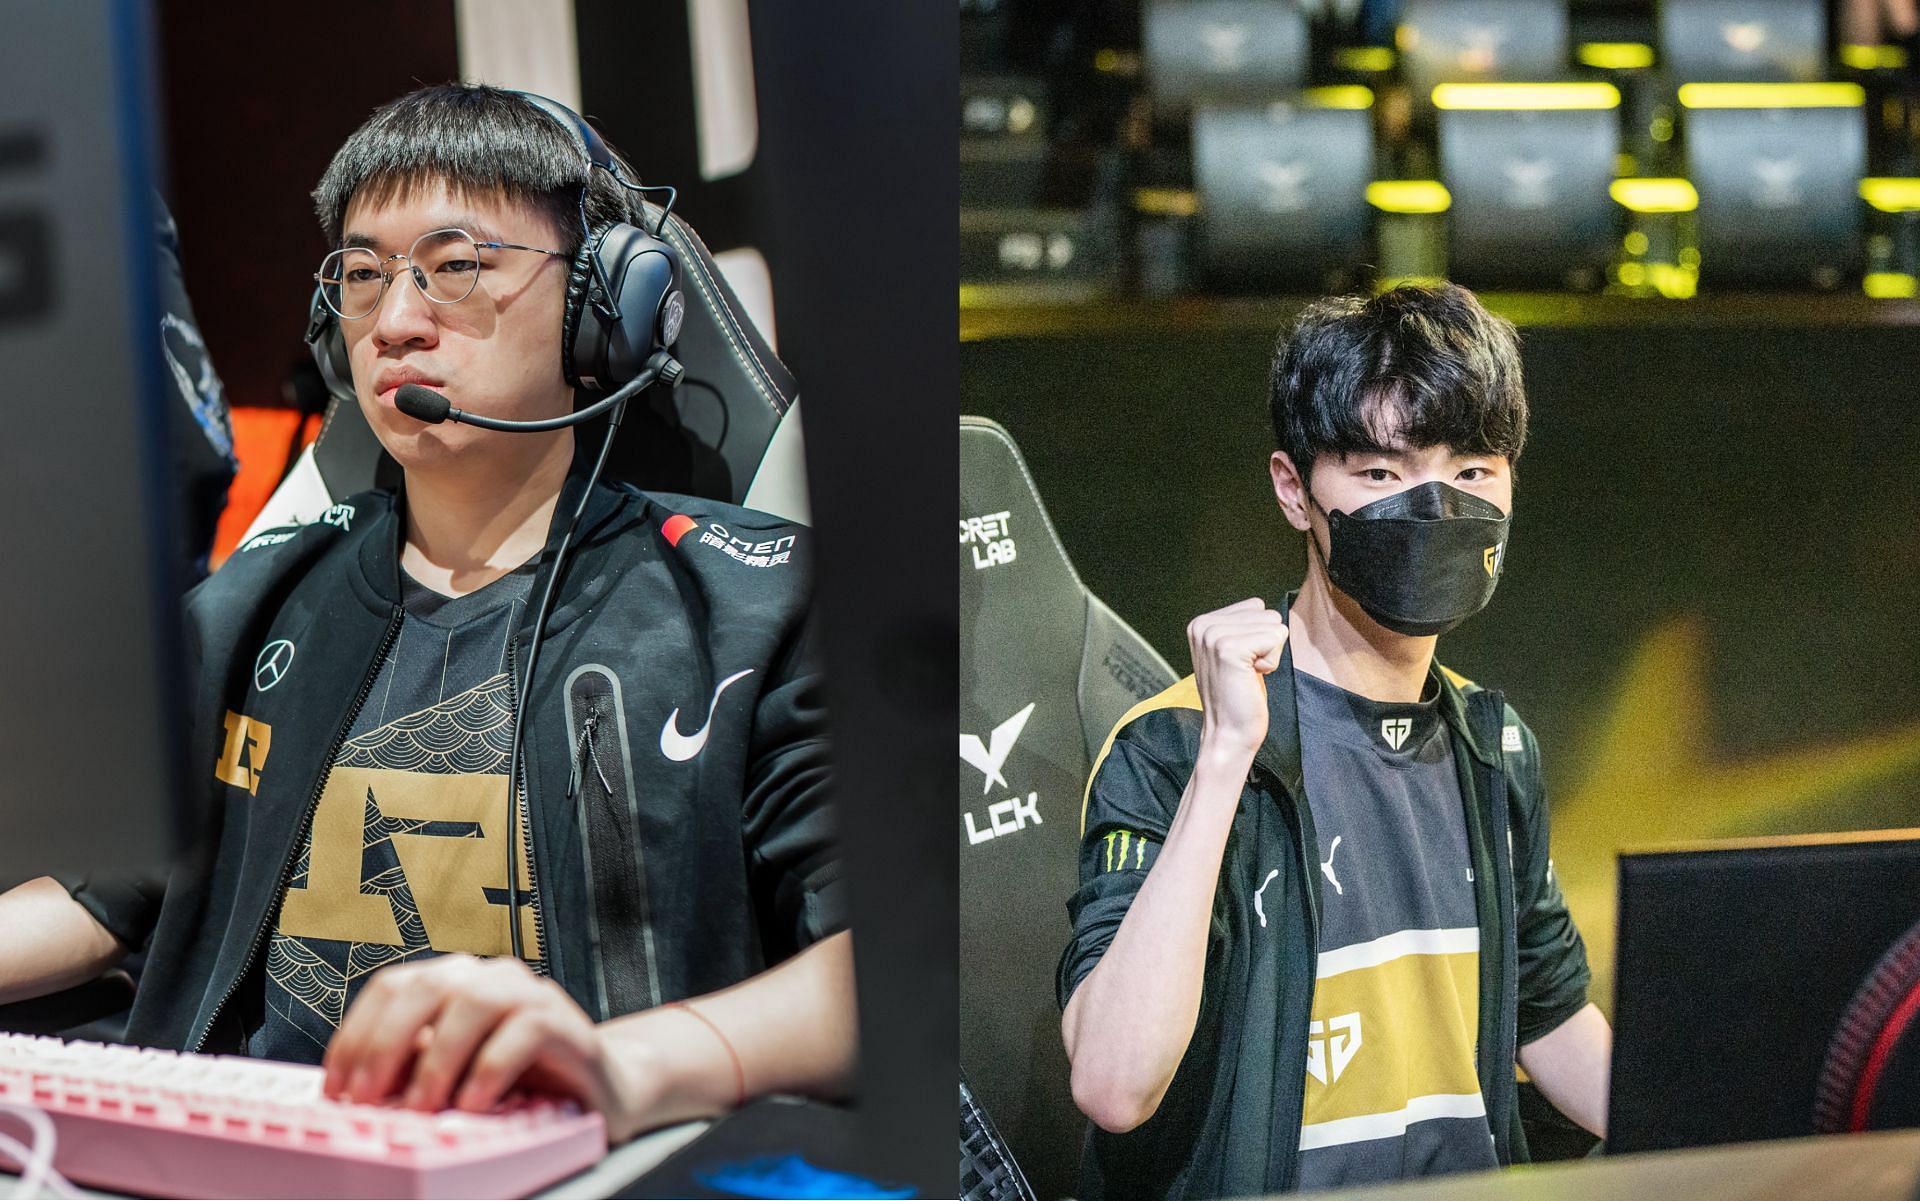 Gen.G vs RNG League of Legends Worlds 2022 Group Stage Head-to-head, livestream details, and more